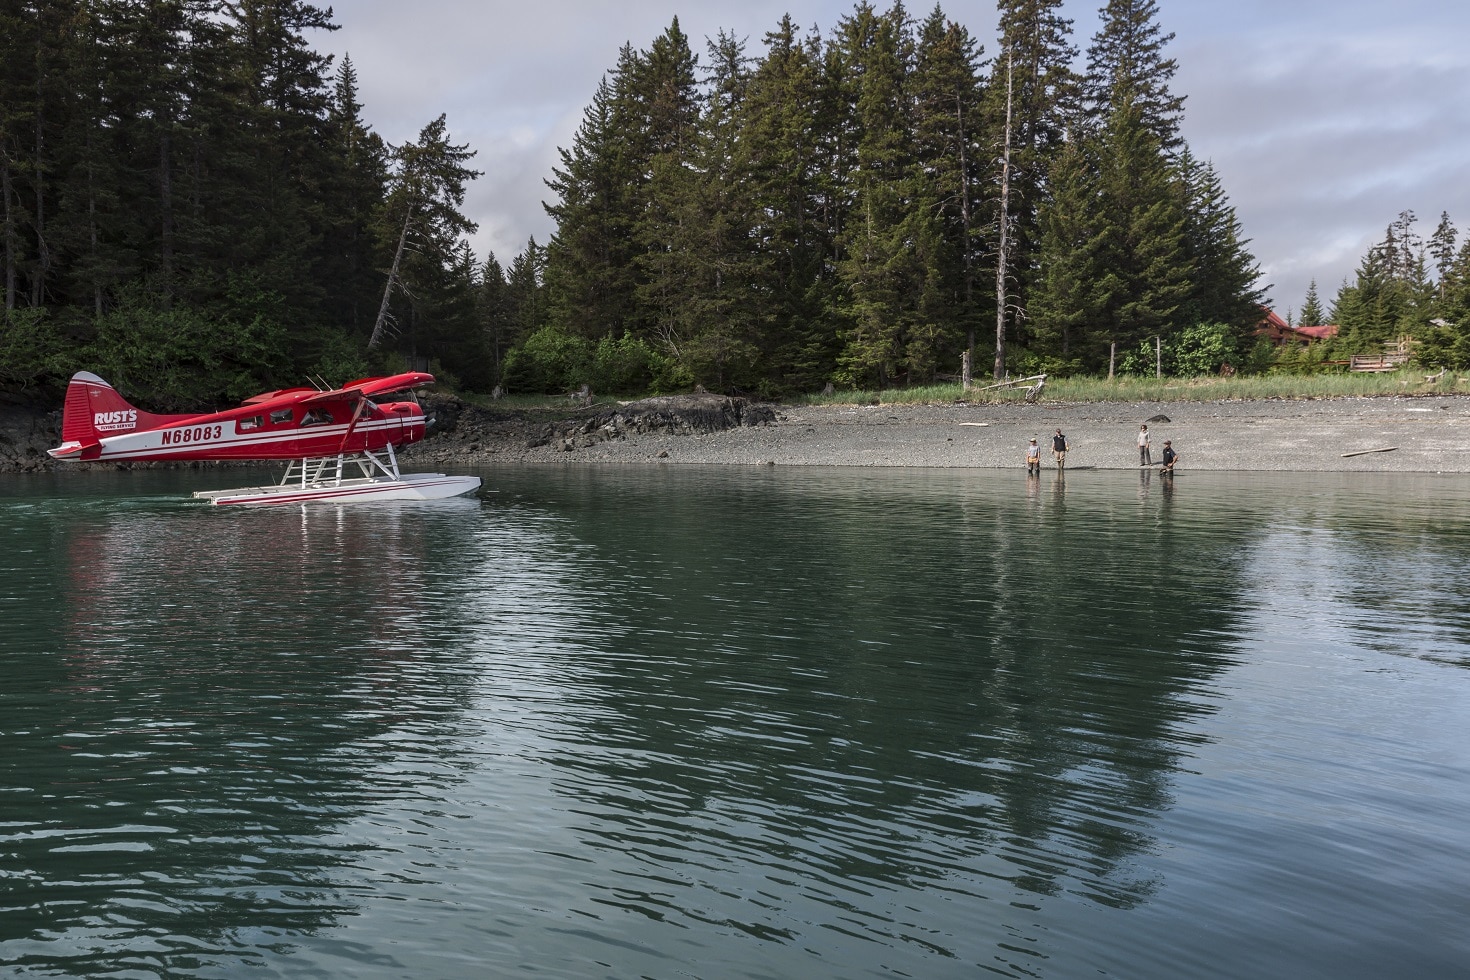 a red floatplane landing at the shore